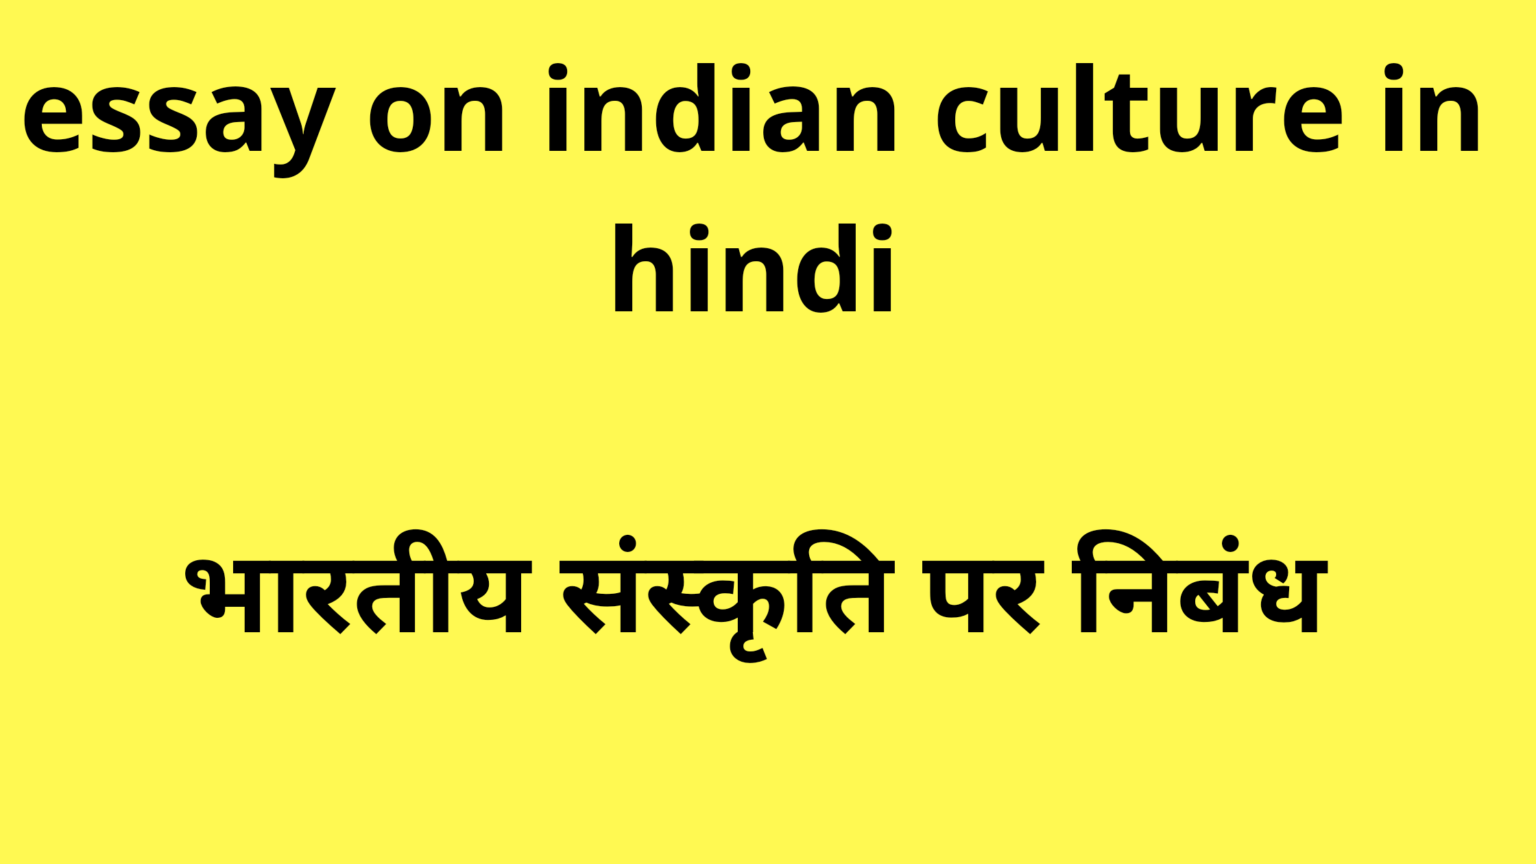 hindi essay on indian culture